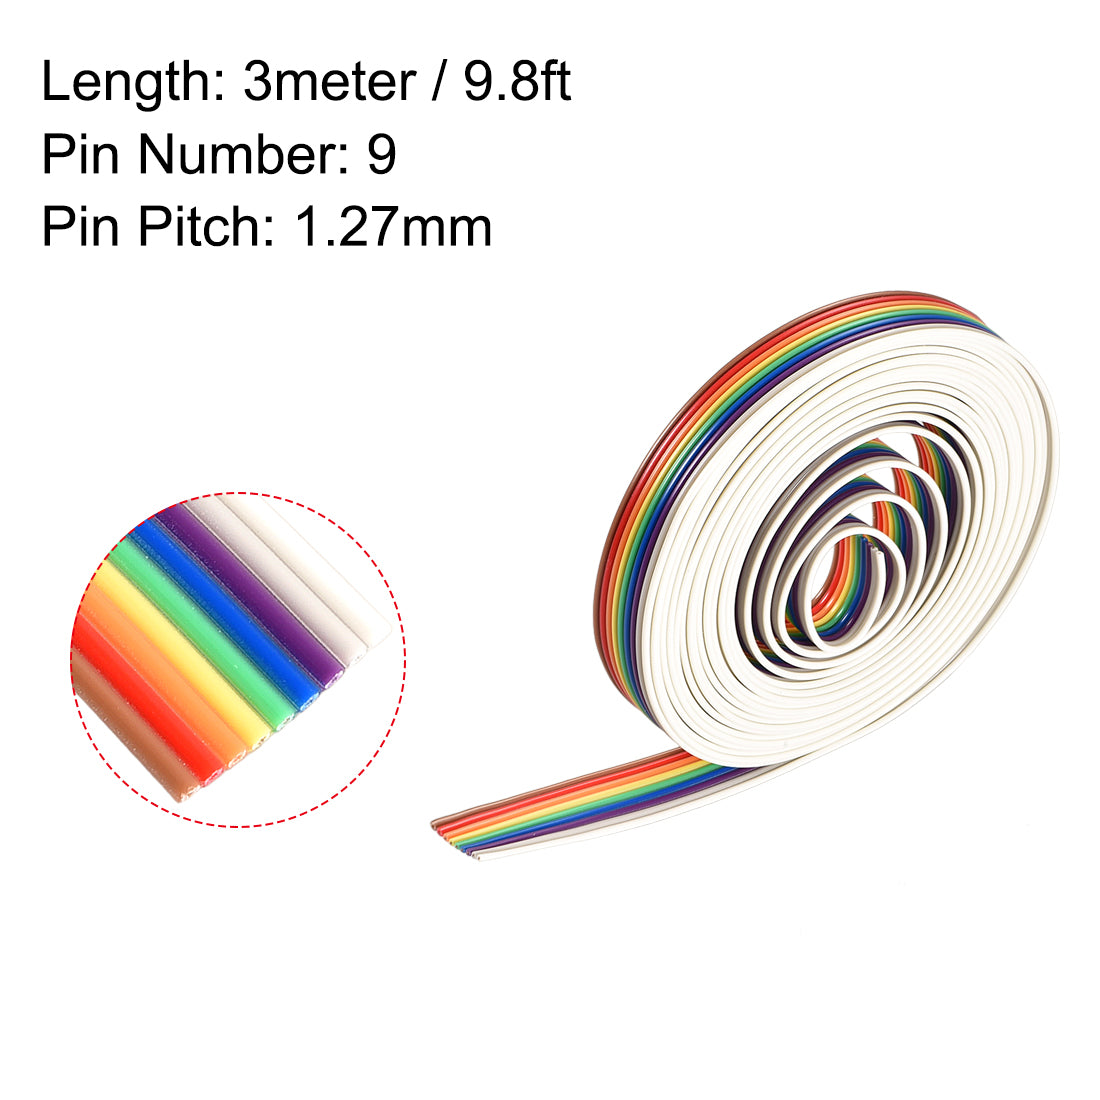 uxcell Uxcell IDC Rainbow Wire Flat Ribbon Cable 9P 1.27mm Pitch 3meter/9.8ft Length